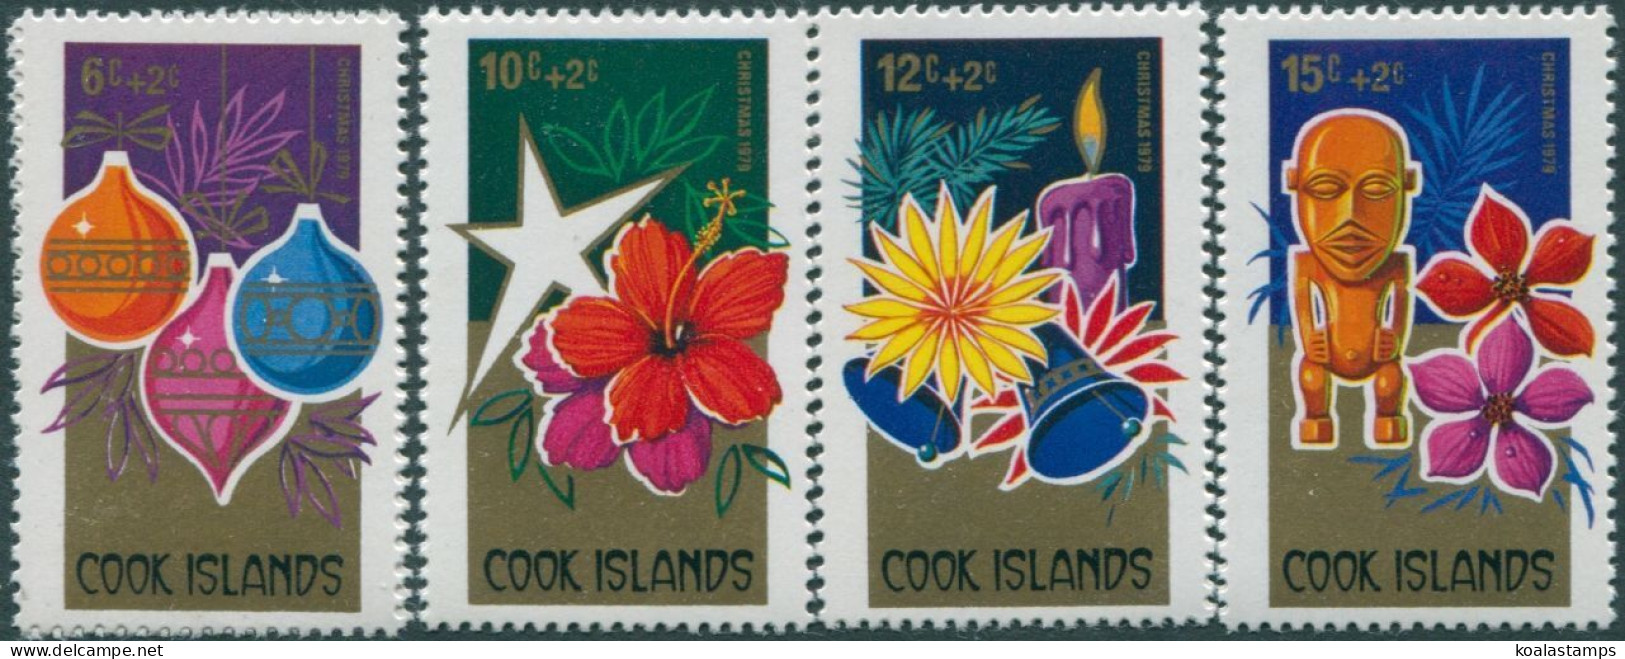 Cook Islands 1979 SG667-670 Christmas Surcharges Set MNH - Cook